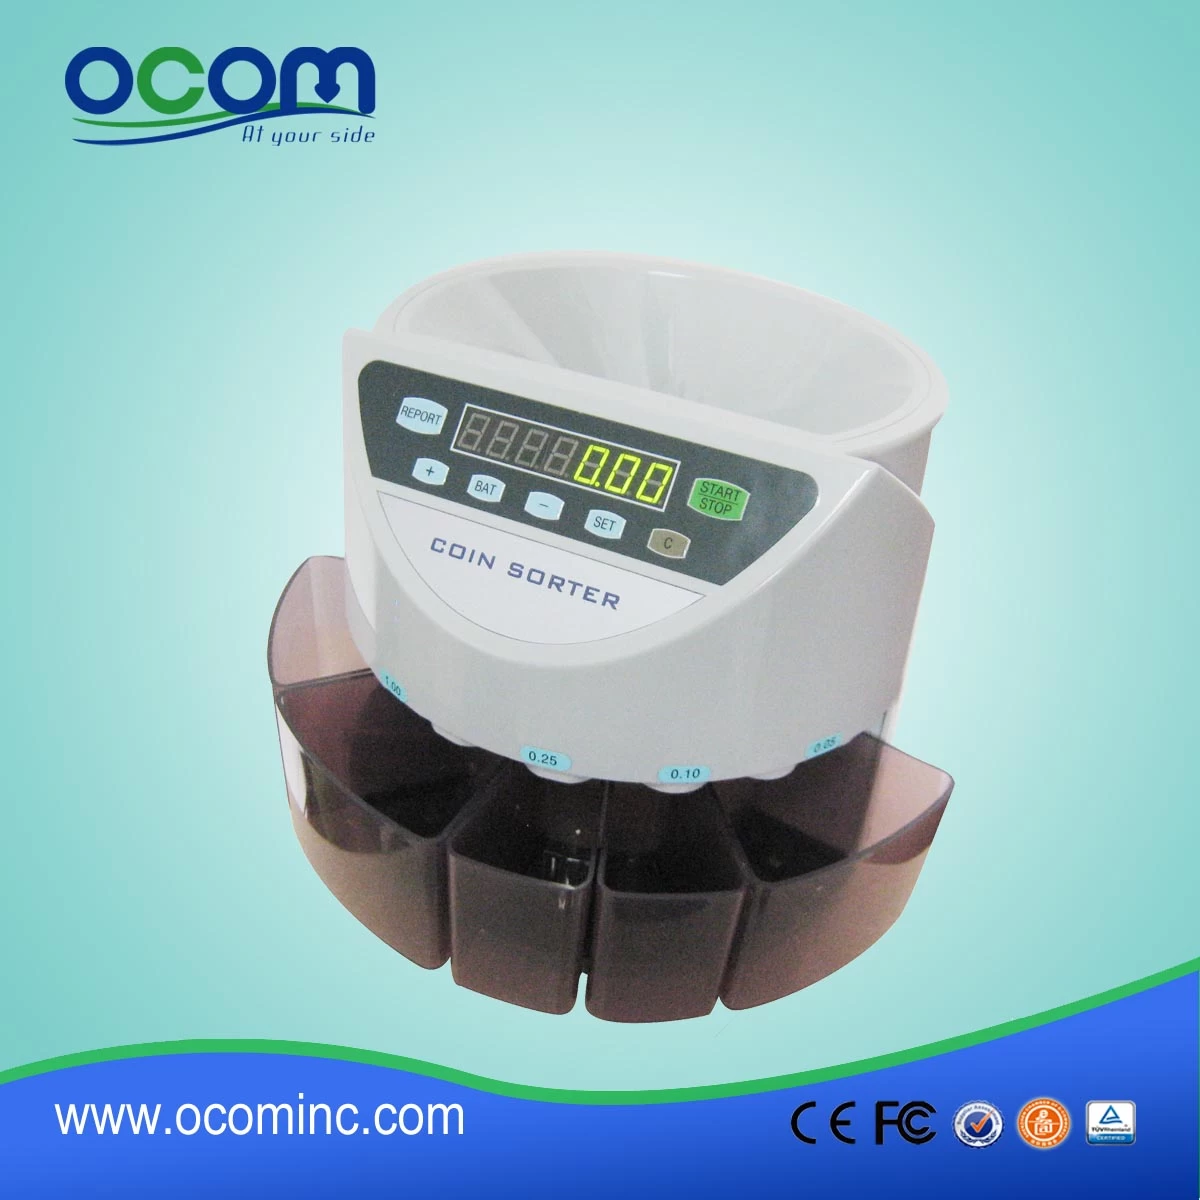 Coin Counting Device with 8 Coin Slots, High Speed -- CS900